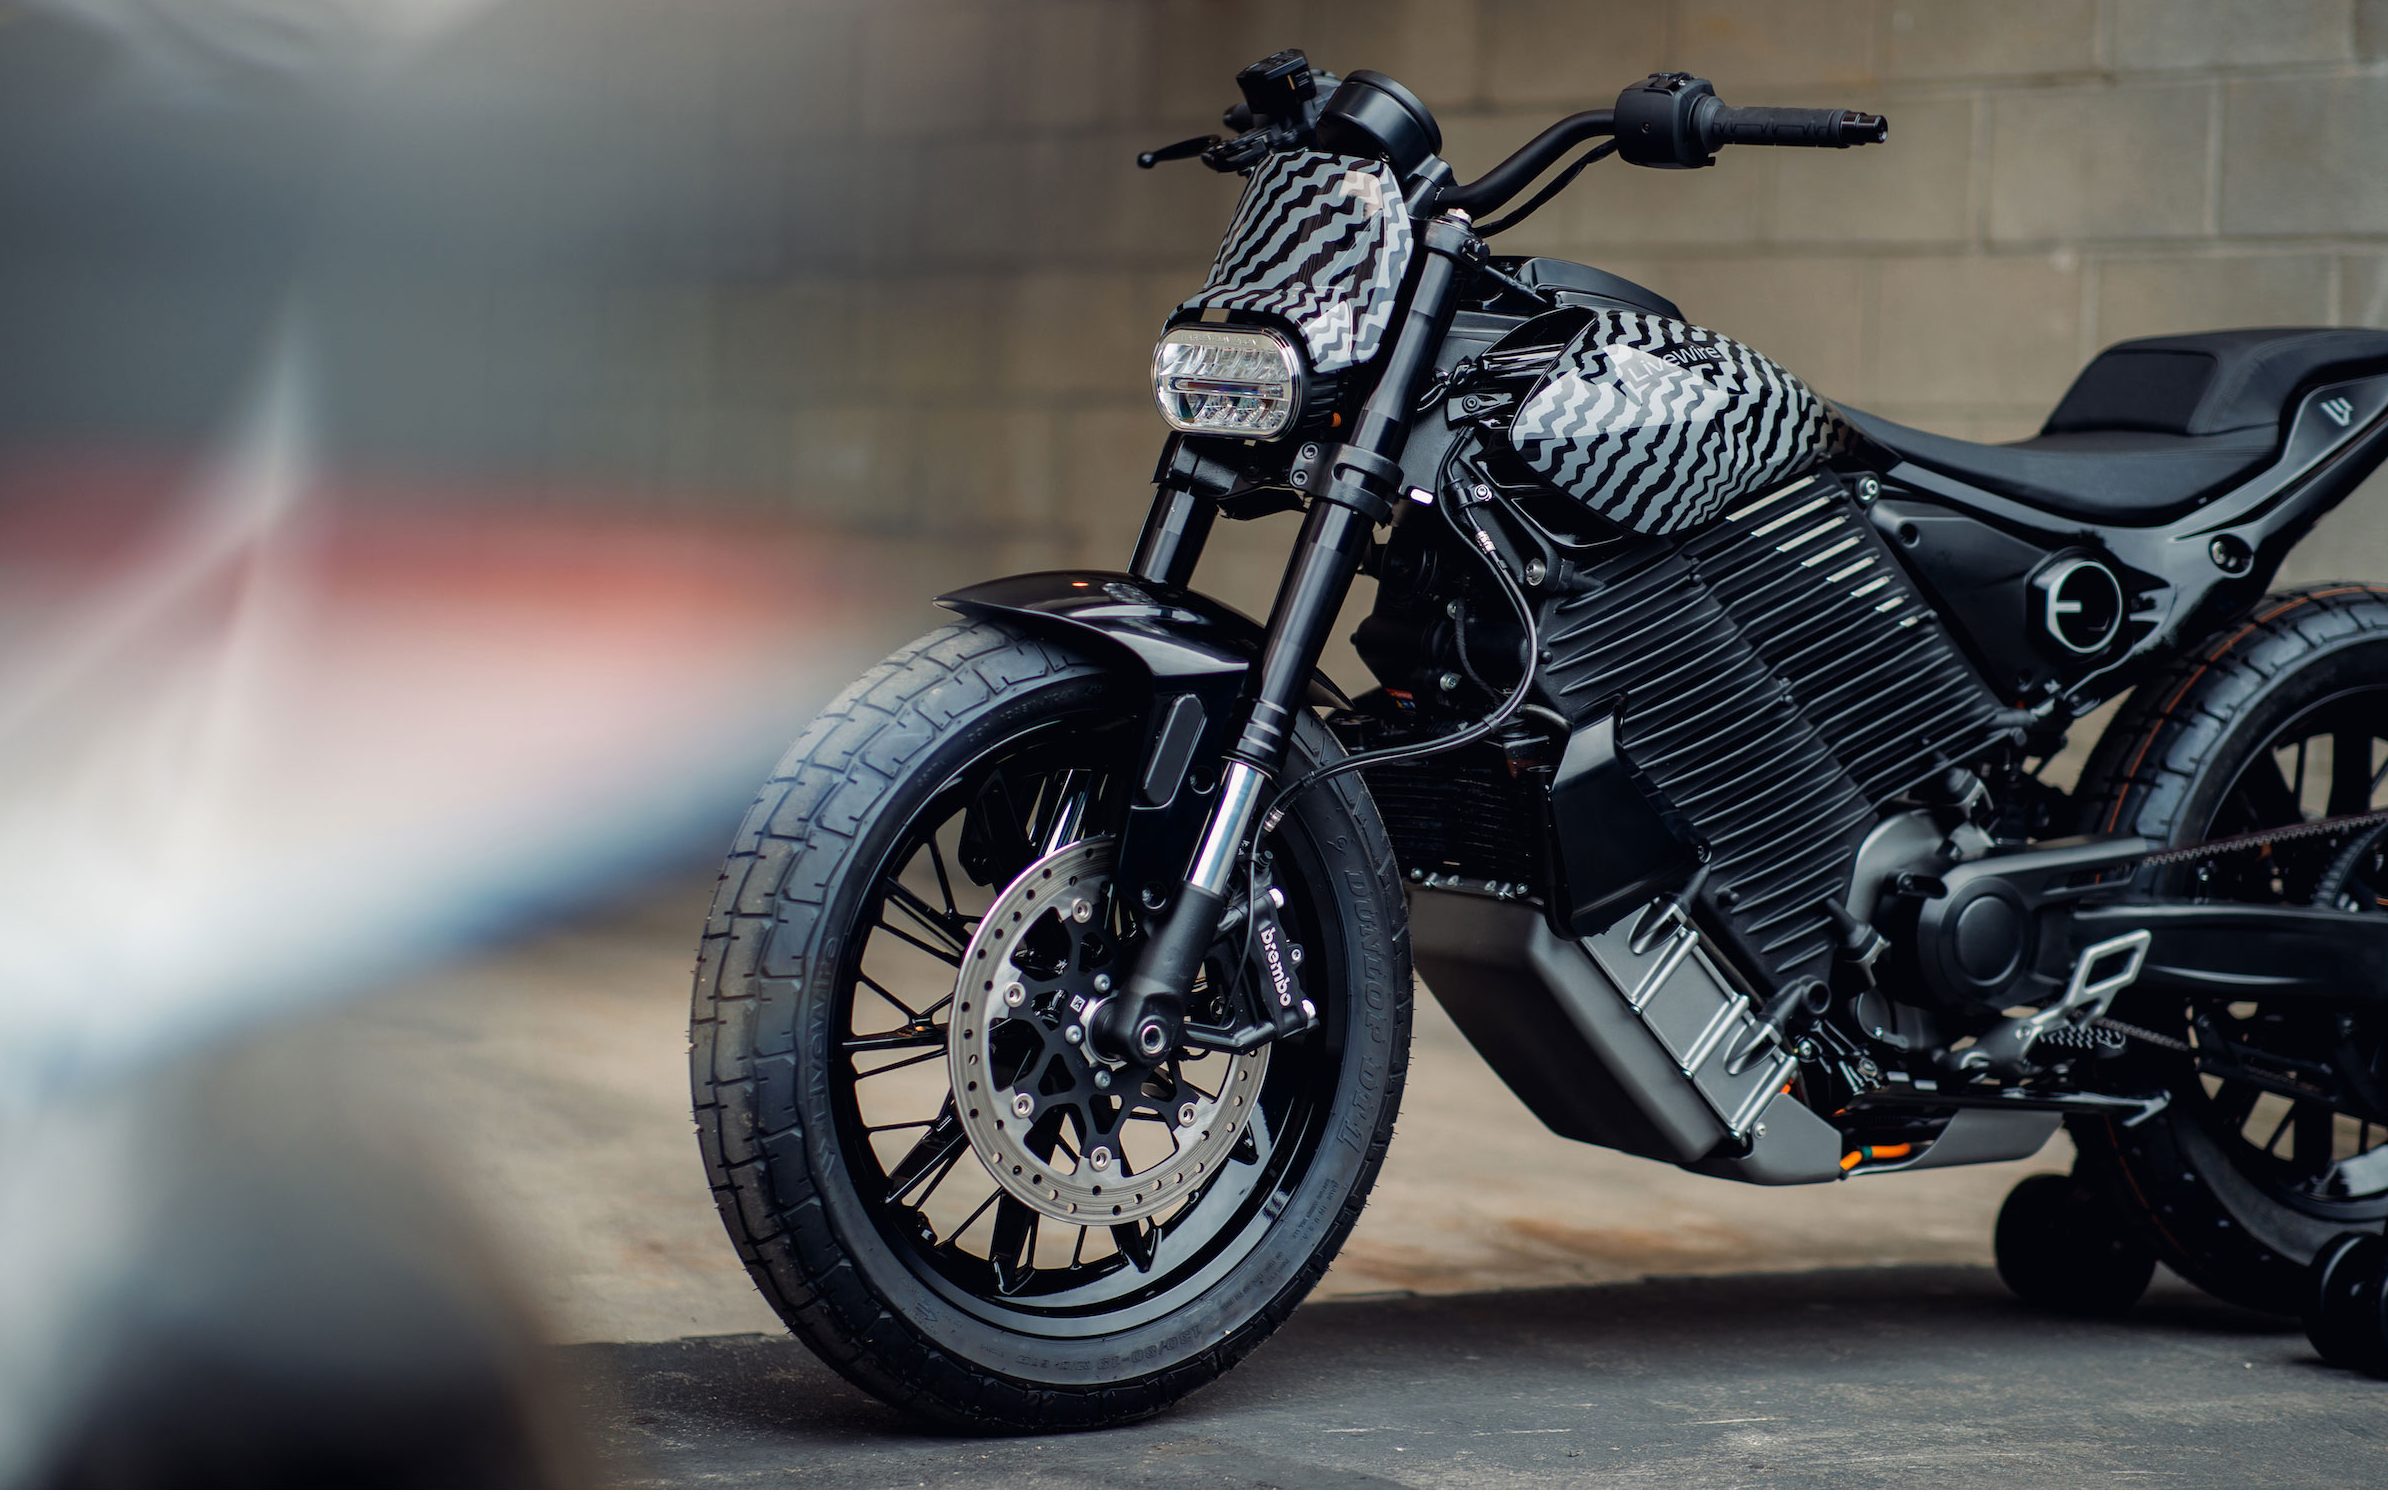 Harley's LiveWire Del Mar - an electric middleweight motorcycle that sold out in under 19 minutes at the initial debut of the launch edition.